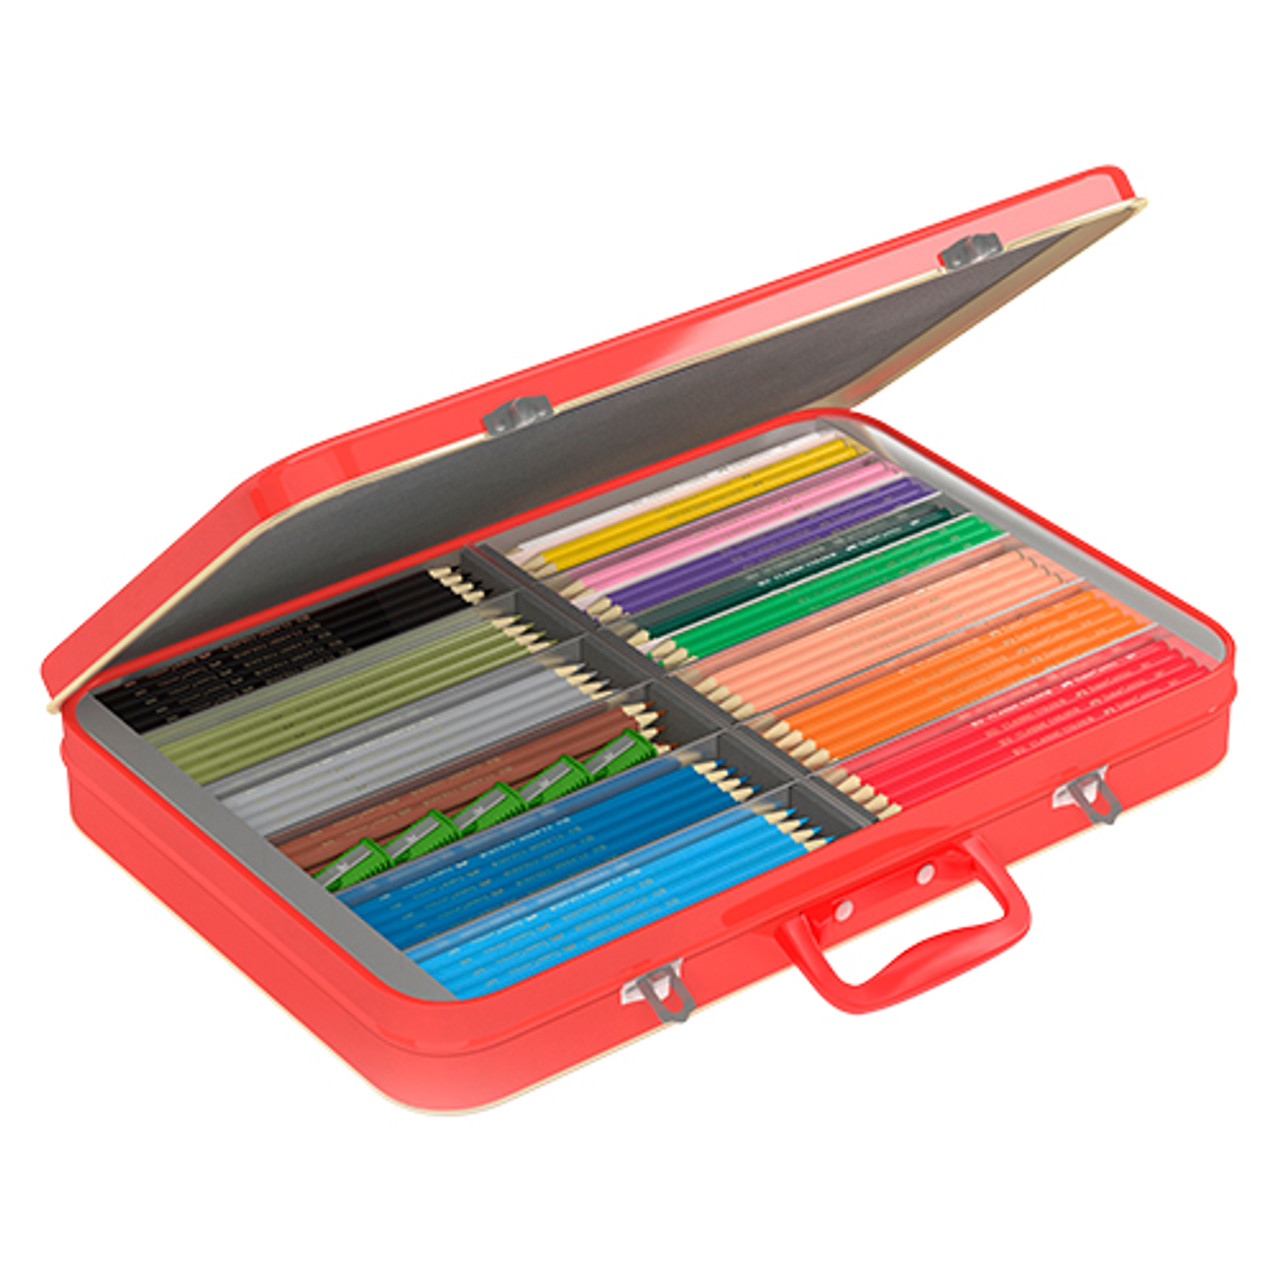 Briefcase-Style　Faber-Castell　Assorted　Pencils　of　Classic　300　Colour　Tin